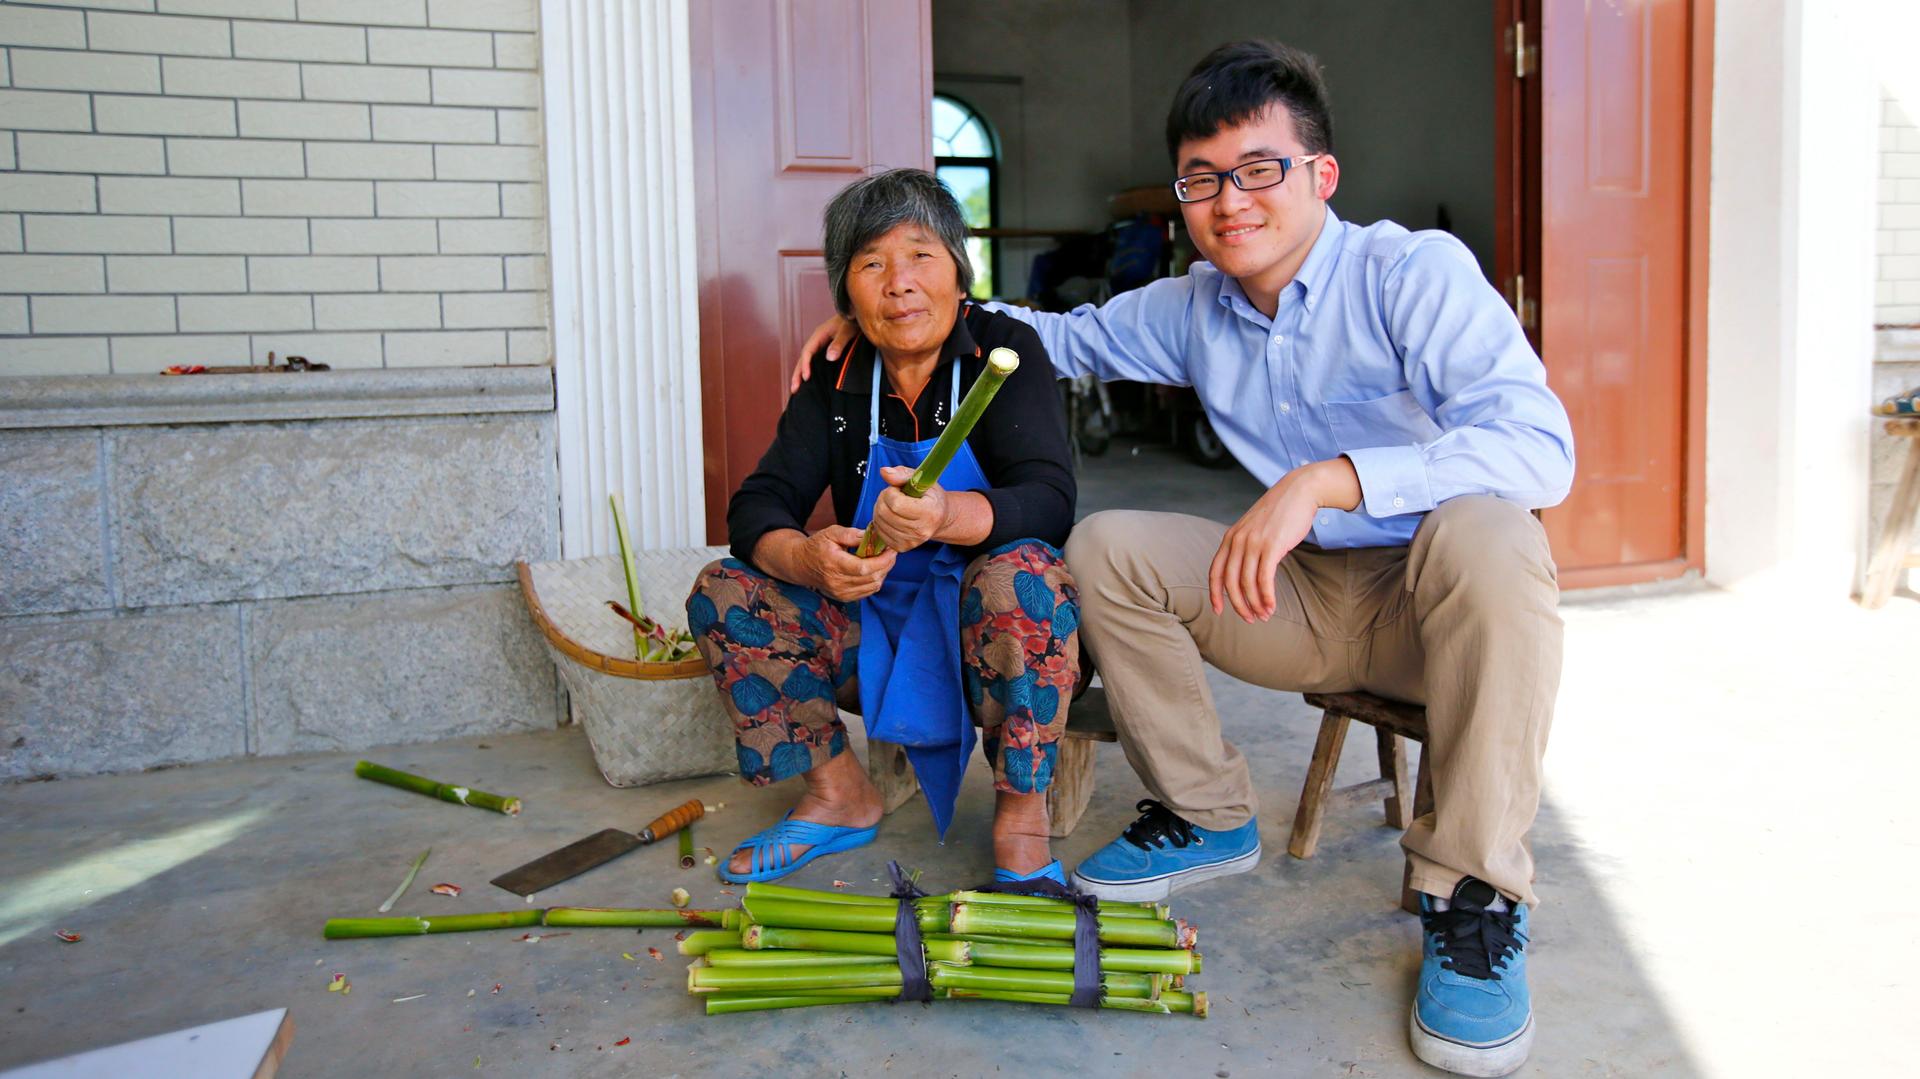 Gu Hangyu, sits with his grandmother Wang Yufang, at her home on Chongming Island near Shanghai. She speaks the Chongming dialect, but not standard Chinese.